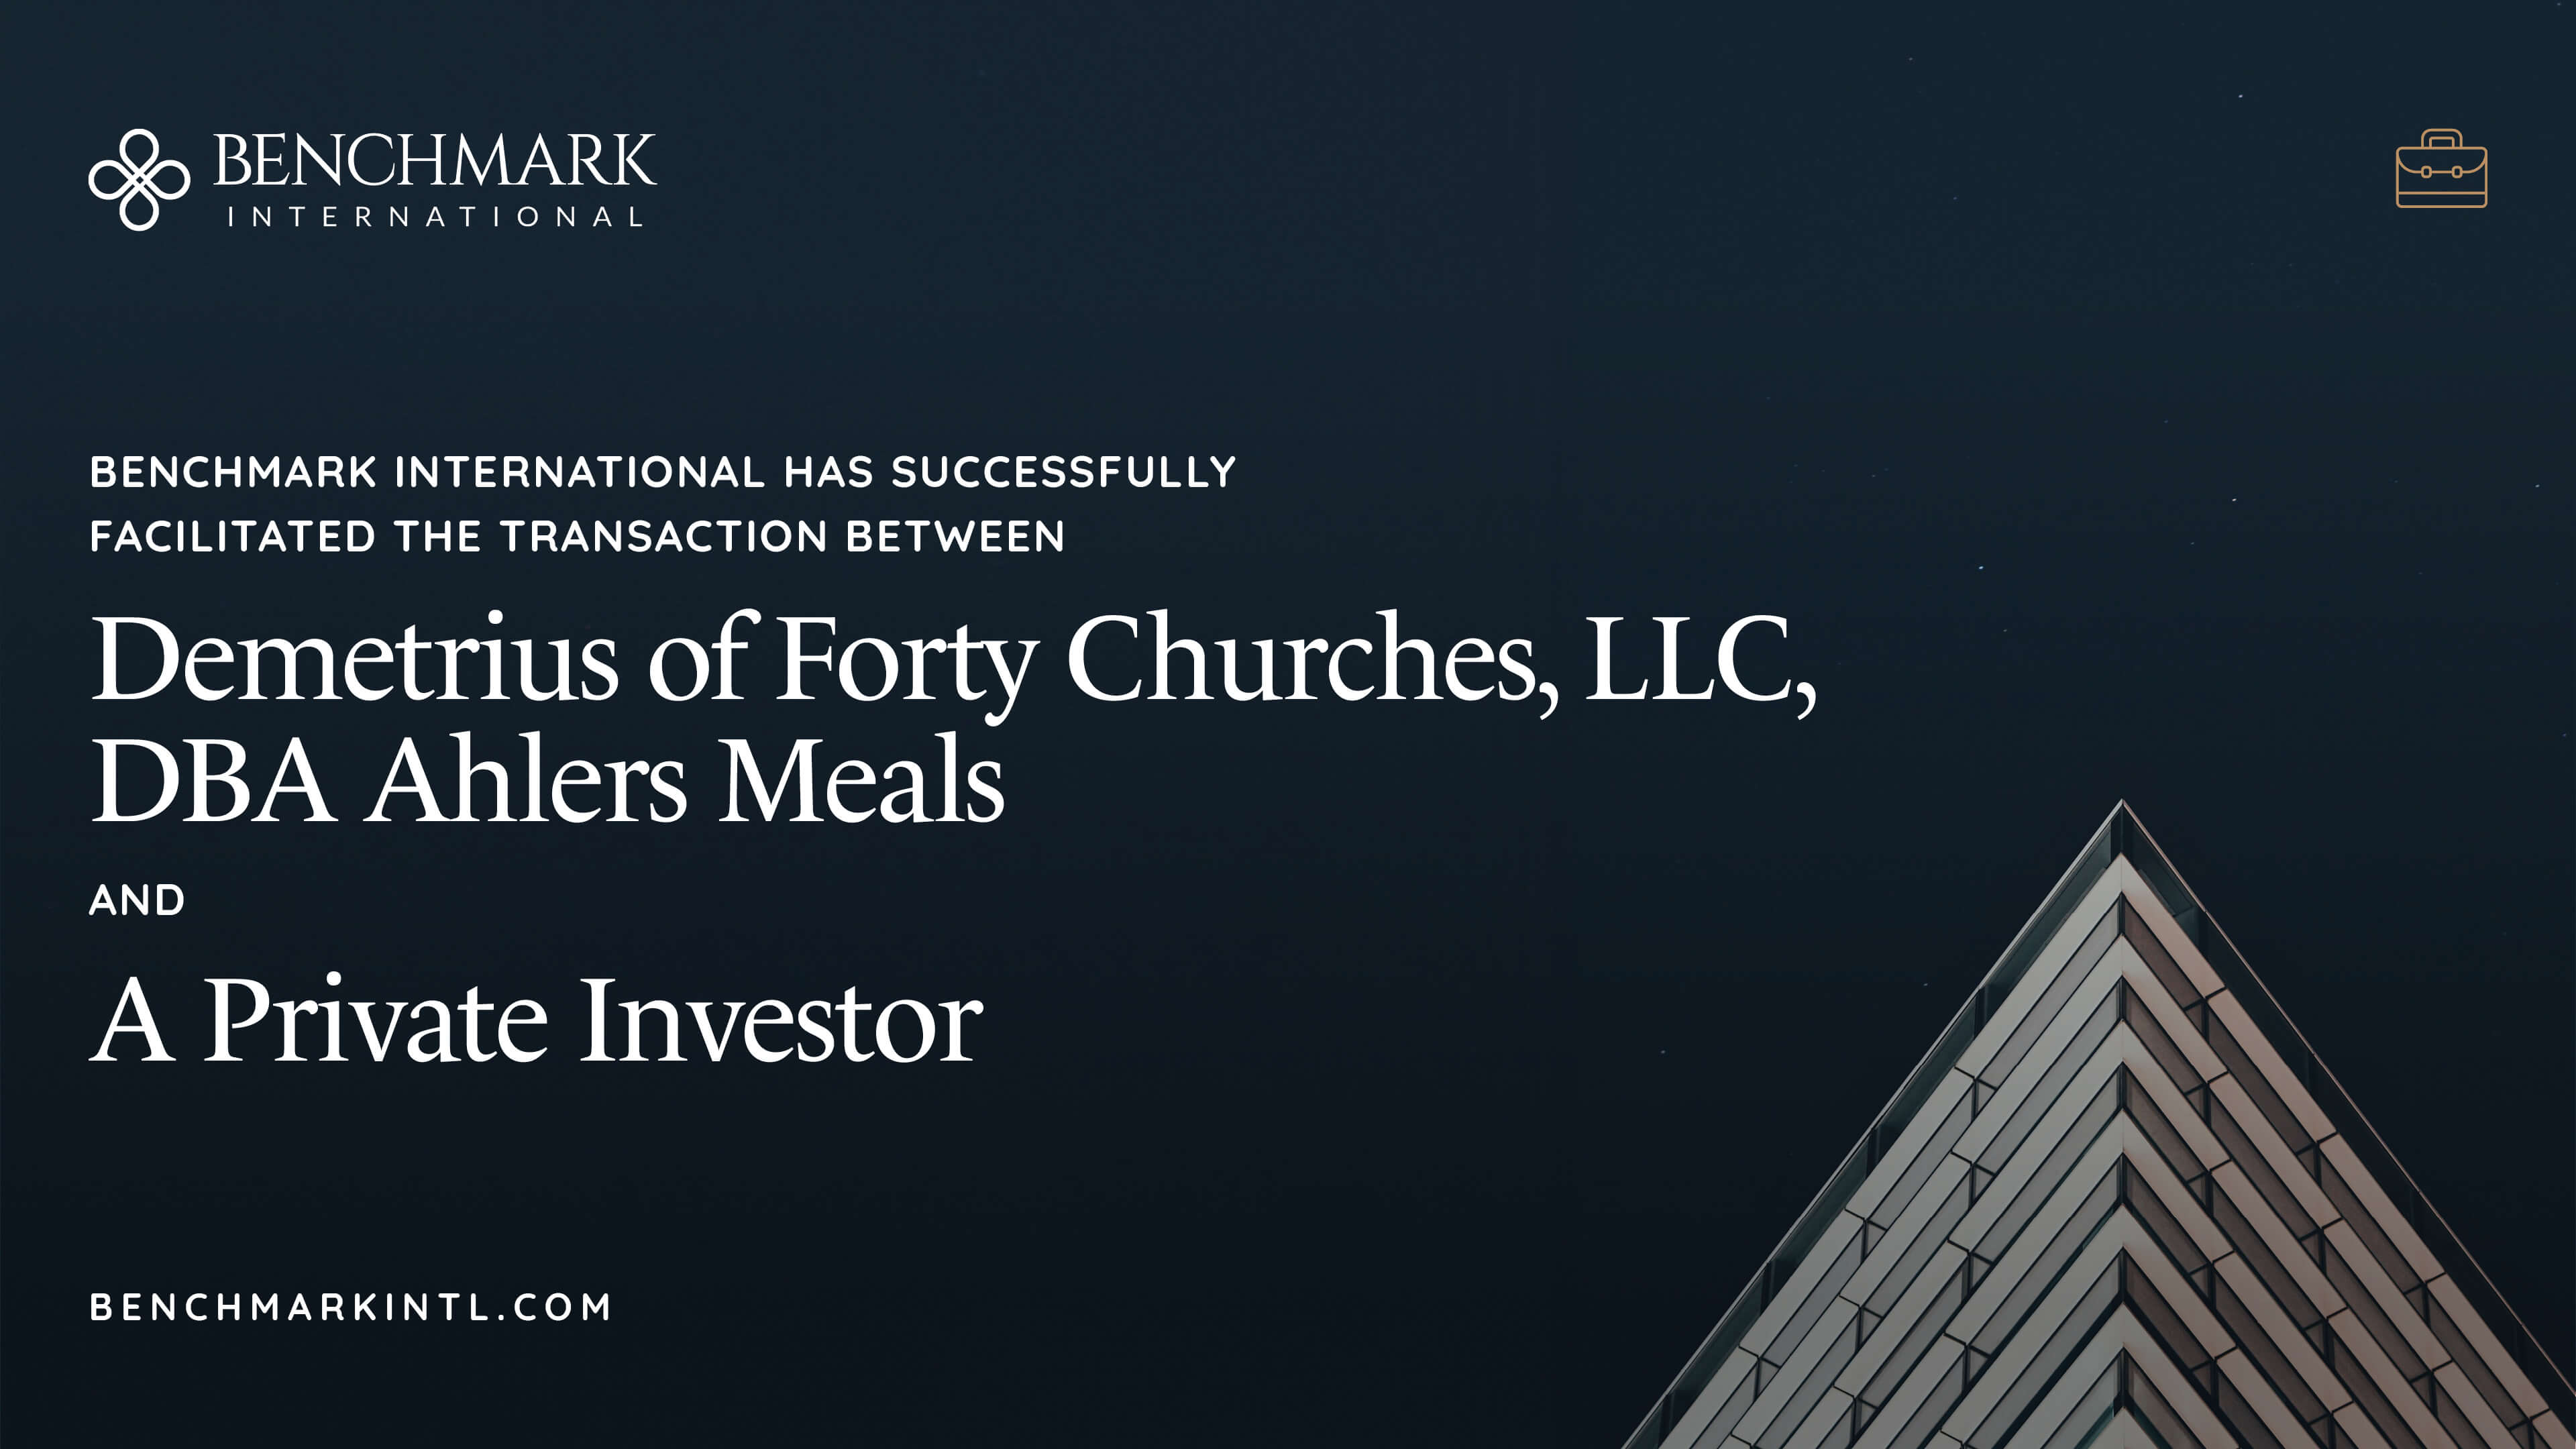 Benchmark International Successfully Facilitated The Transaction Between Demetrius Of Forty Churches, LLC, DBA Ahlers Meals And A Private Investor